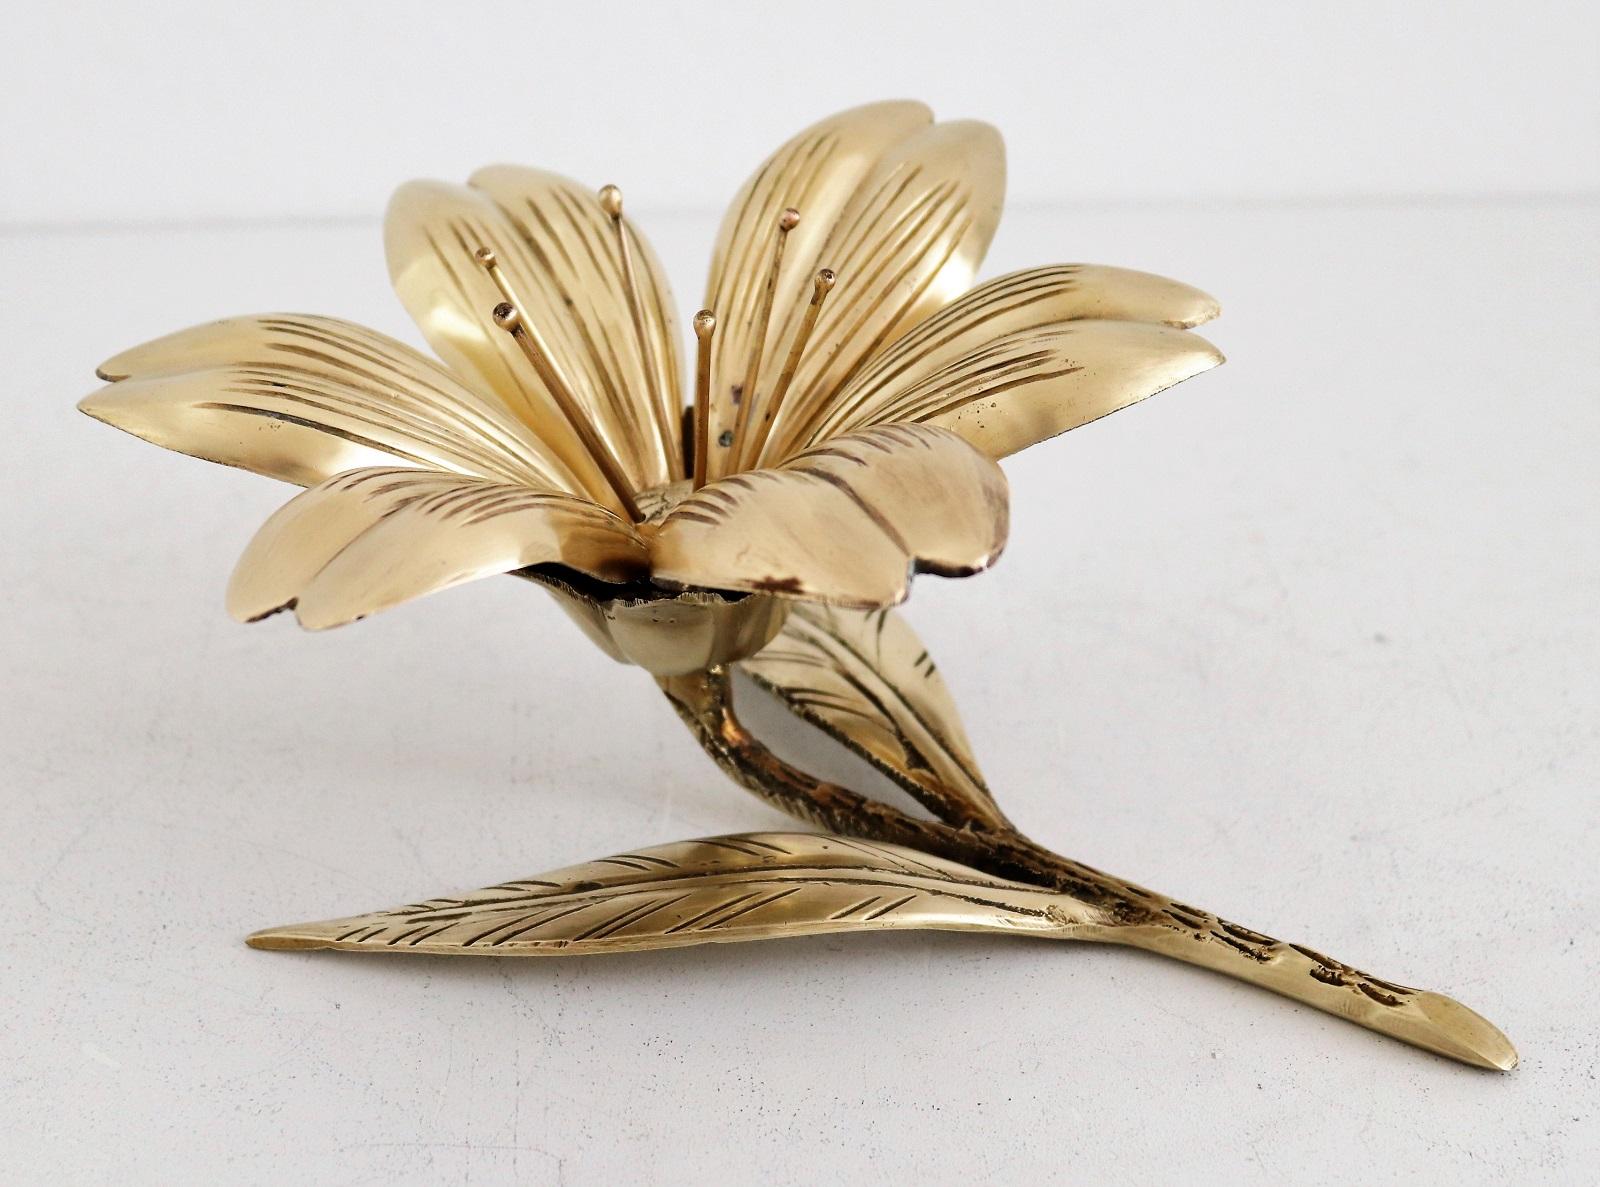 Italian Midcentury Flower in Brass with Petal Ashtrays for Cigarettes, 1950s 1